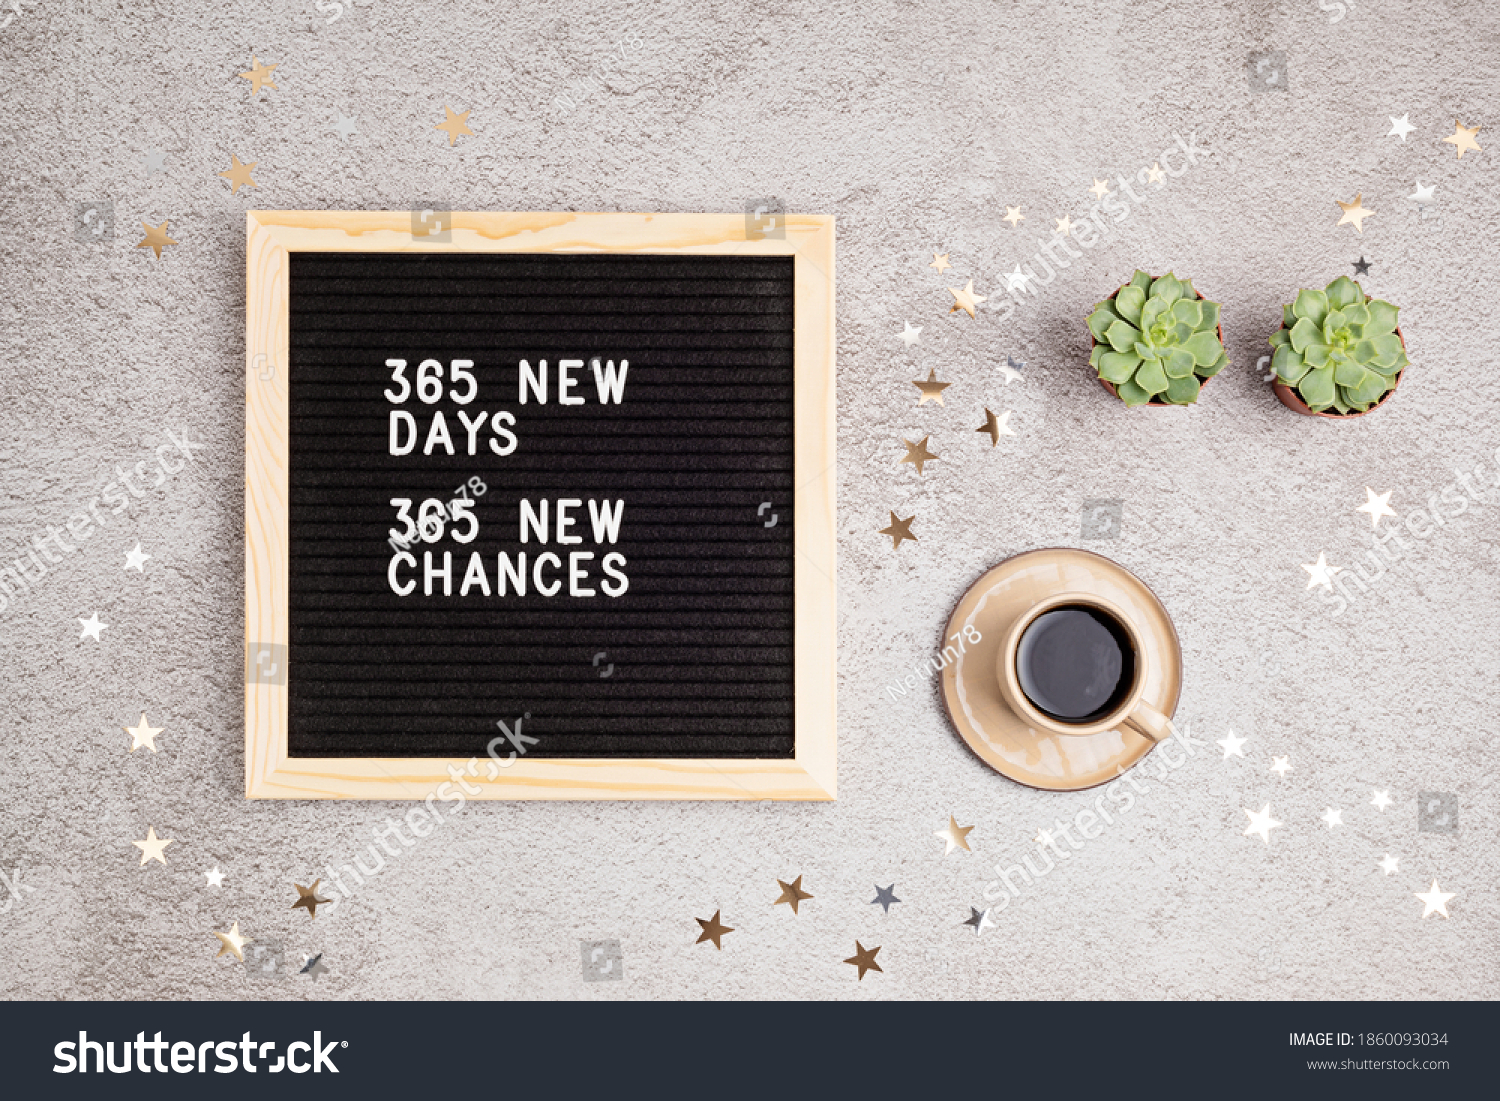 365 new days, 365 new chances. Letter board with motivational quote on grey concrete background with coffee cup. New year resolutions and goal setting, self improvement and development concept.  #1860093034